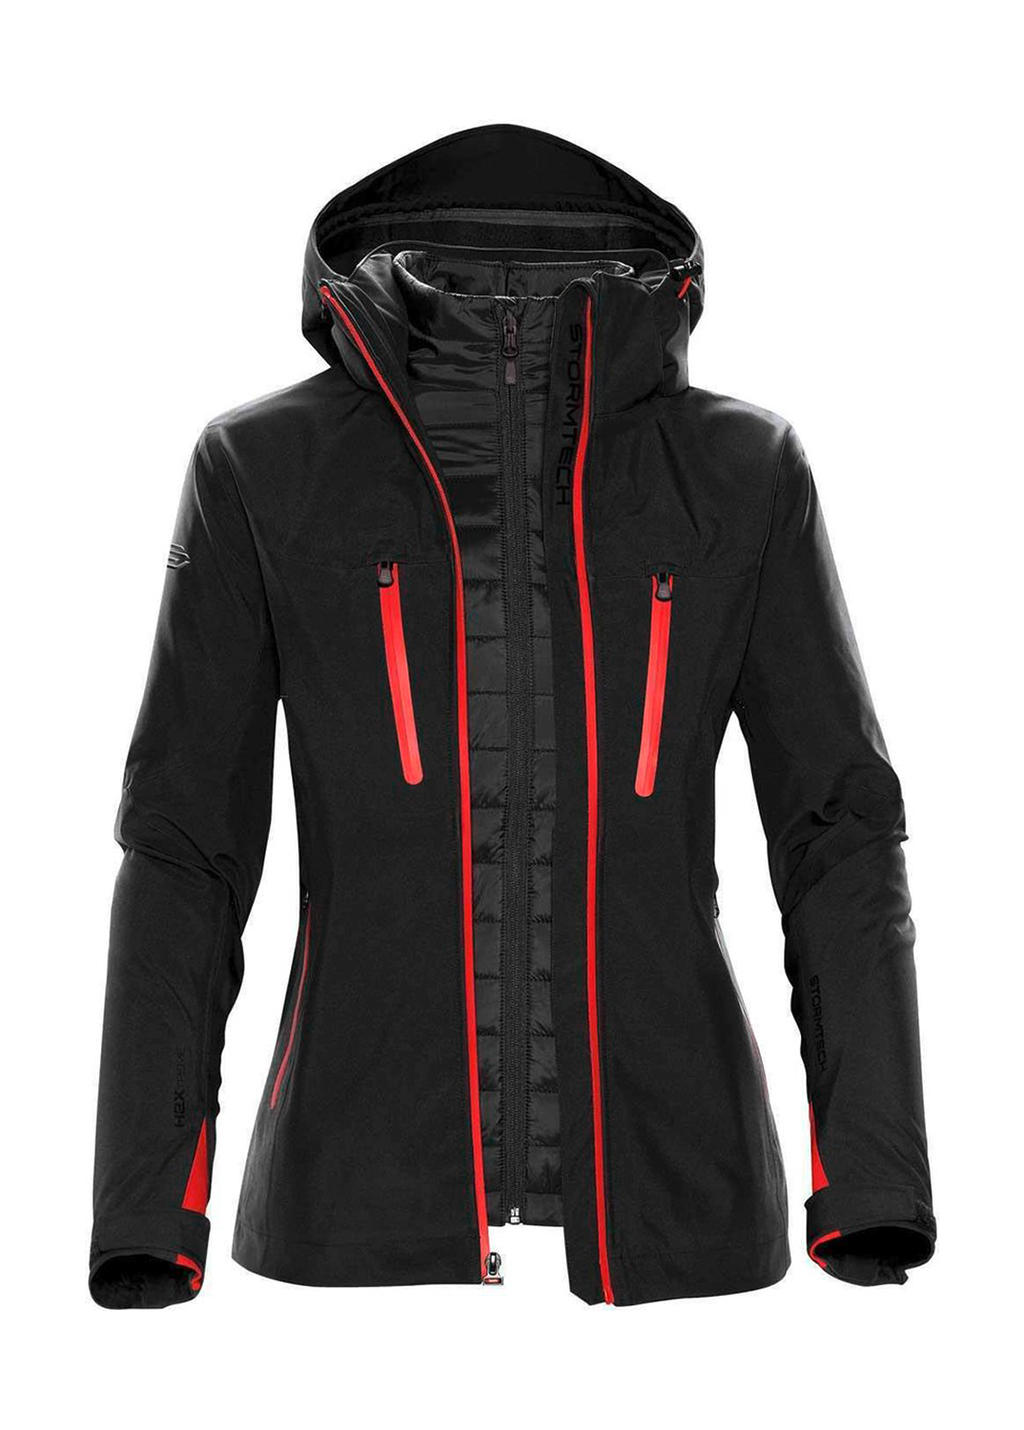  Womens Matrix System Jacket in Farbe Black/Bright Red